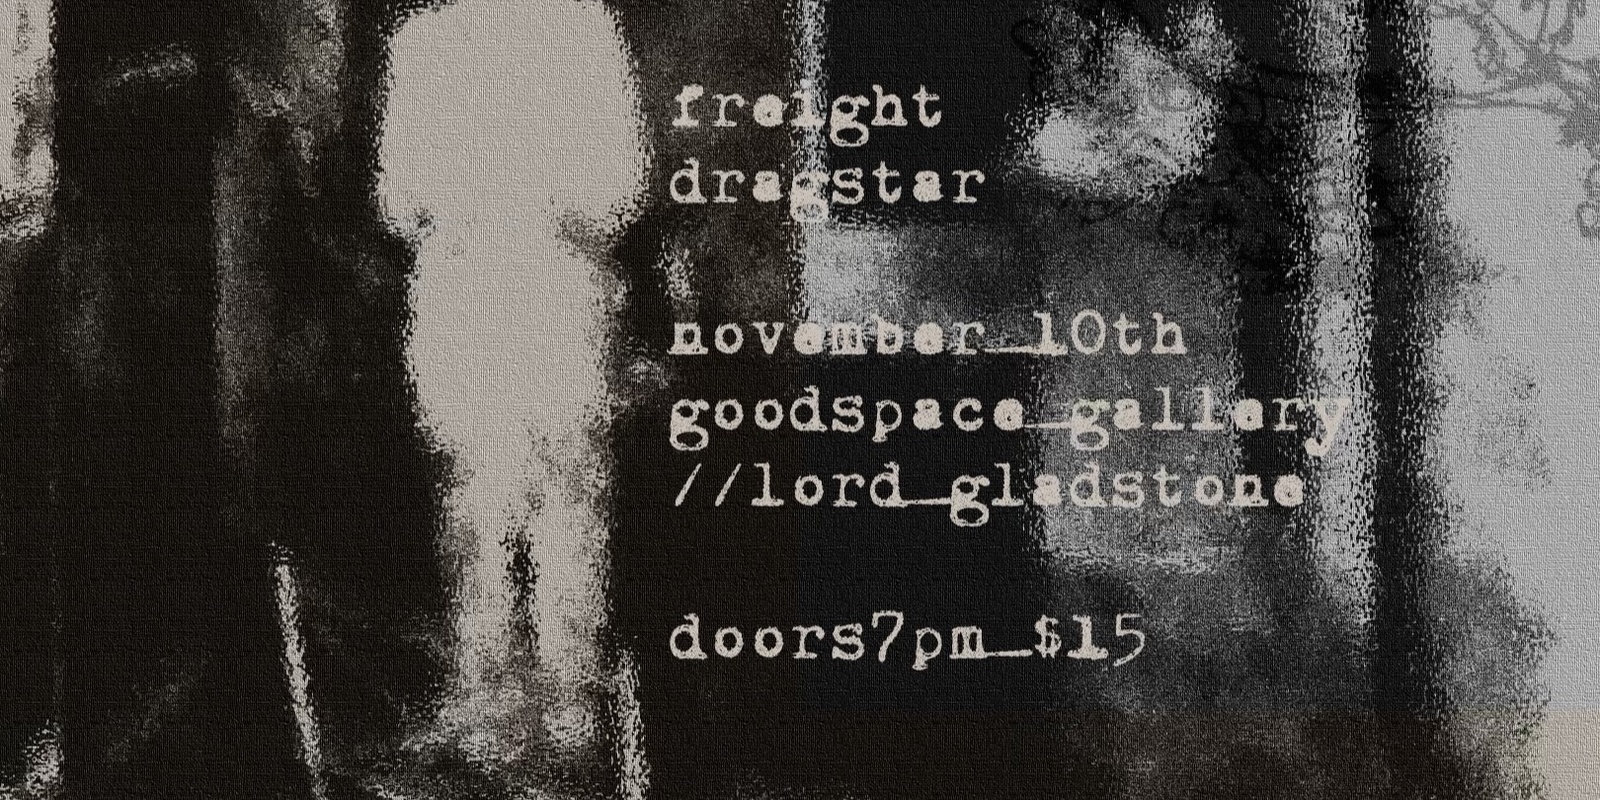 Banner image for Freight, Dragstar @ The Lord Gladstone